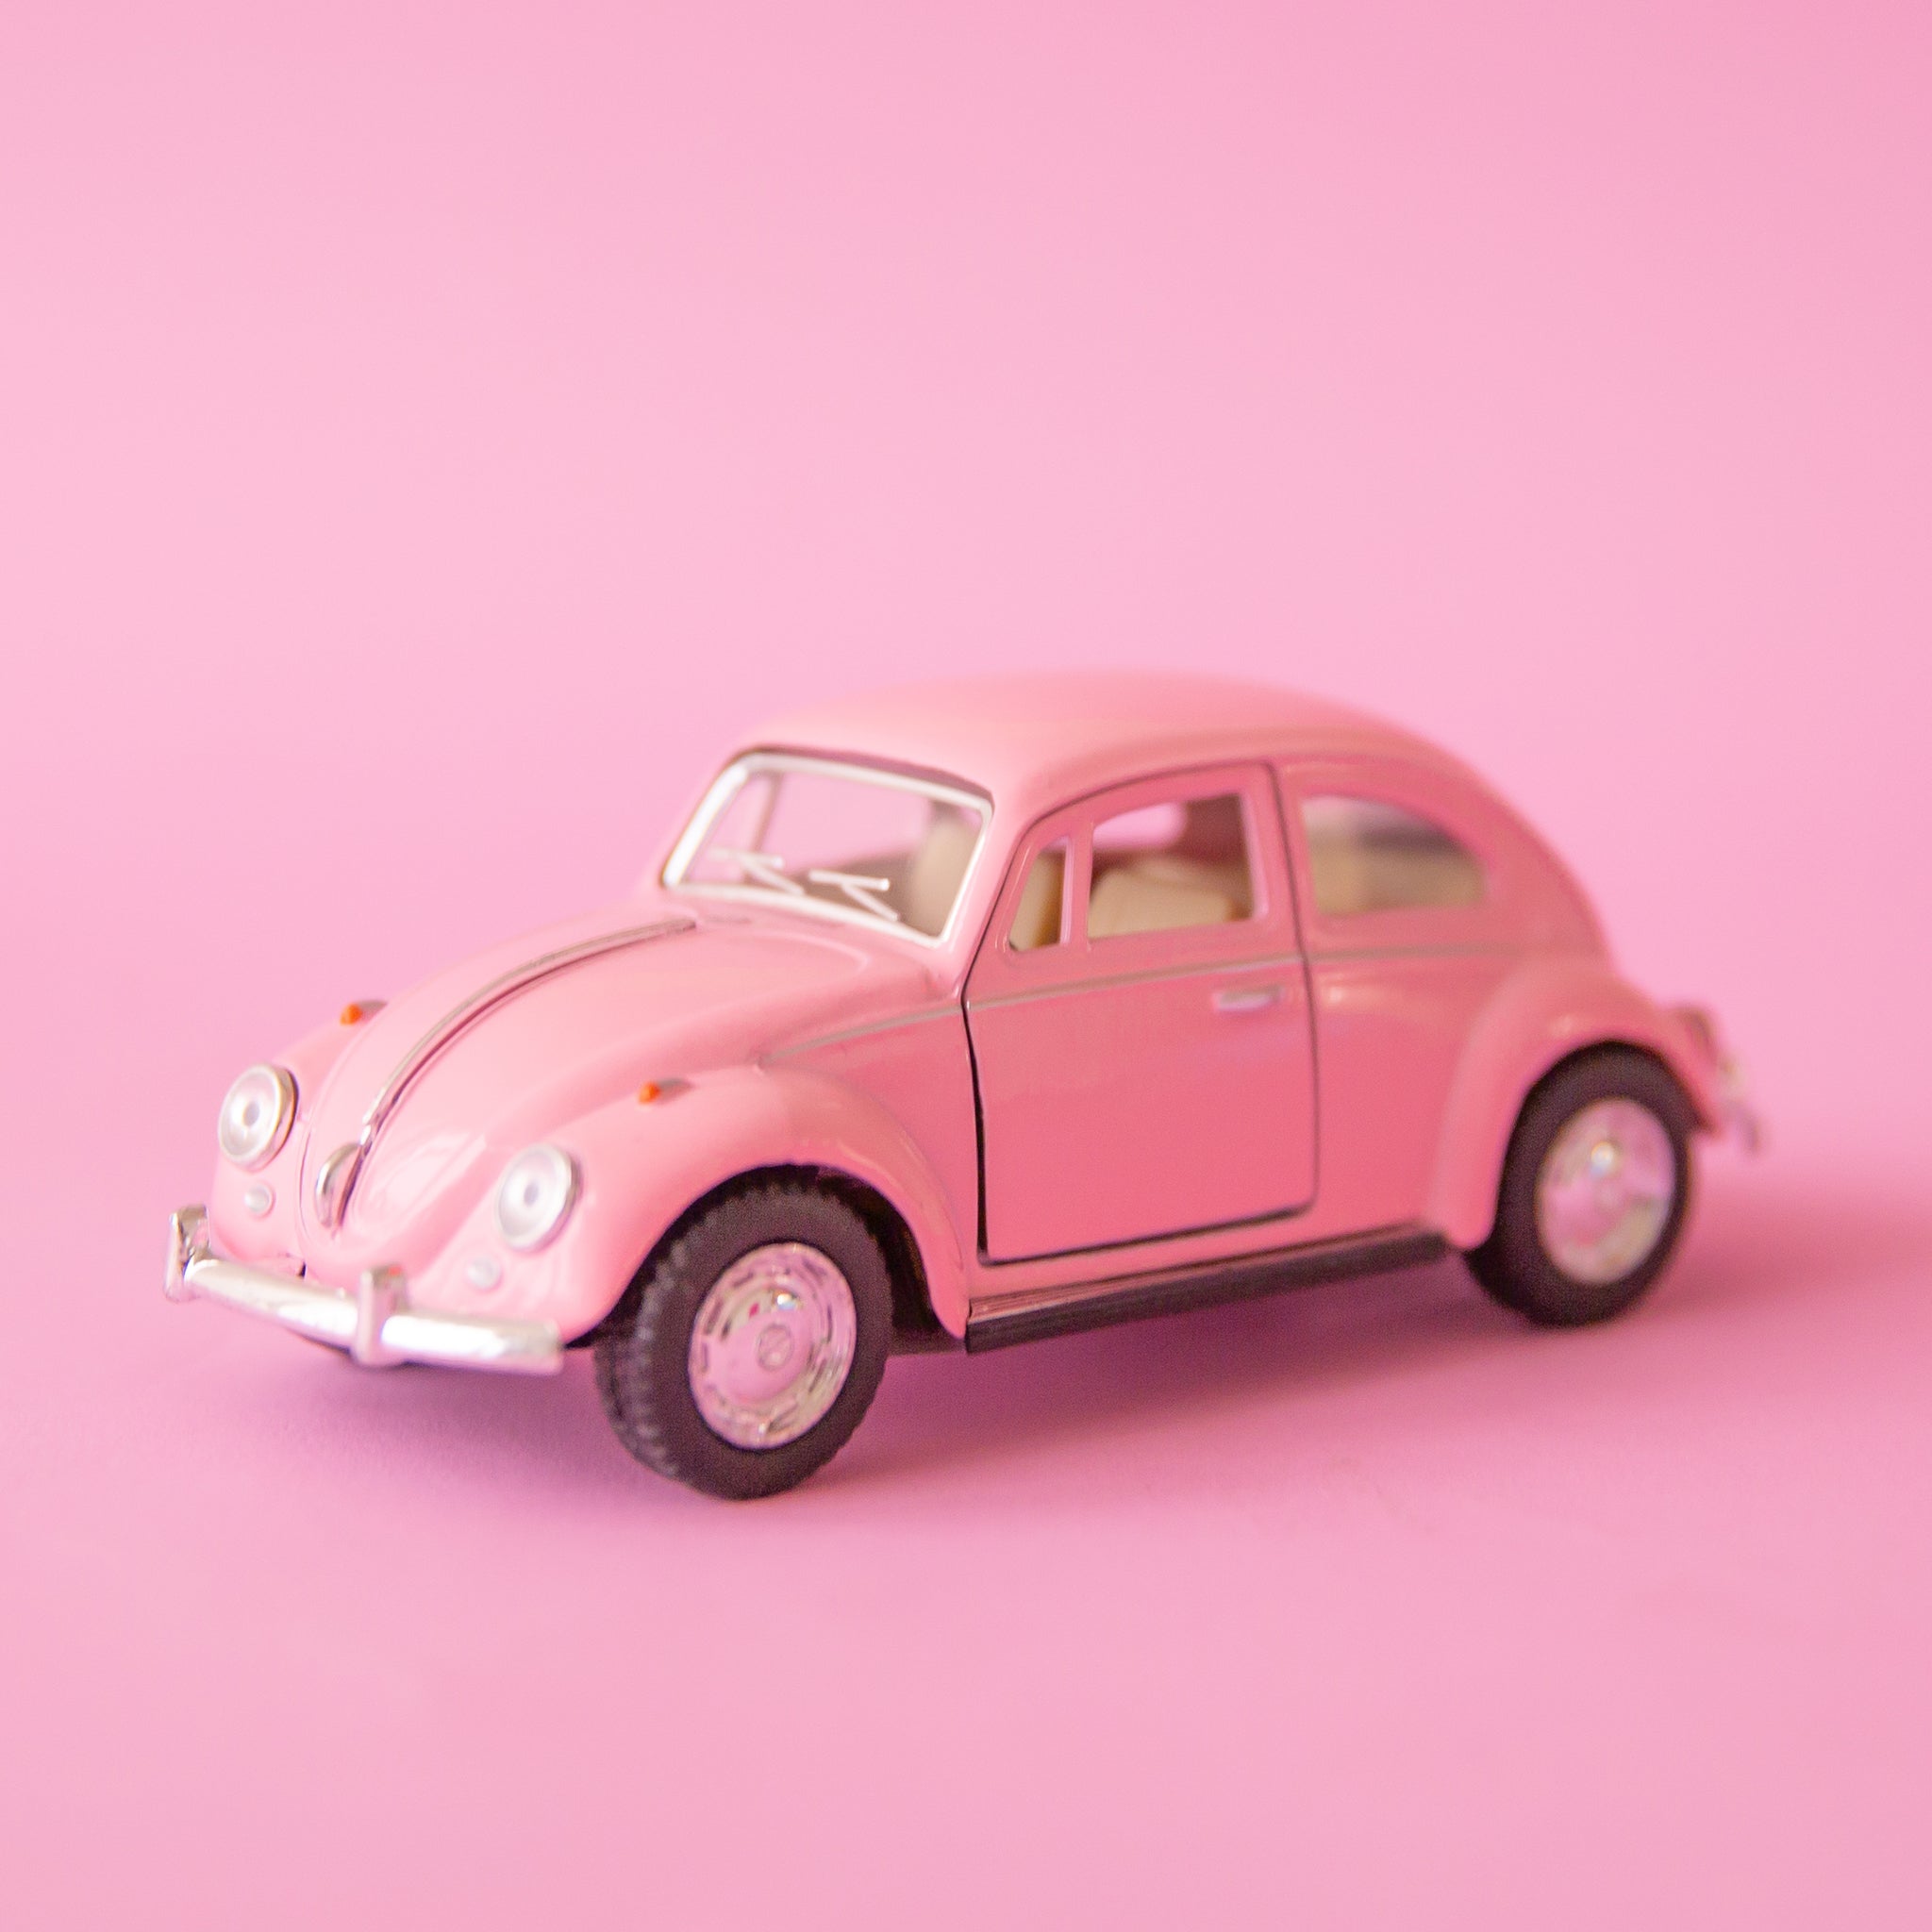 On a pink background is a pink beetle car toy. 